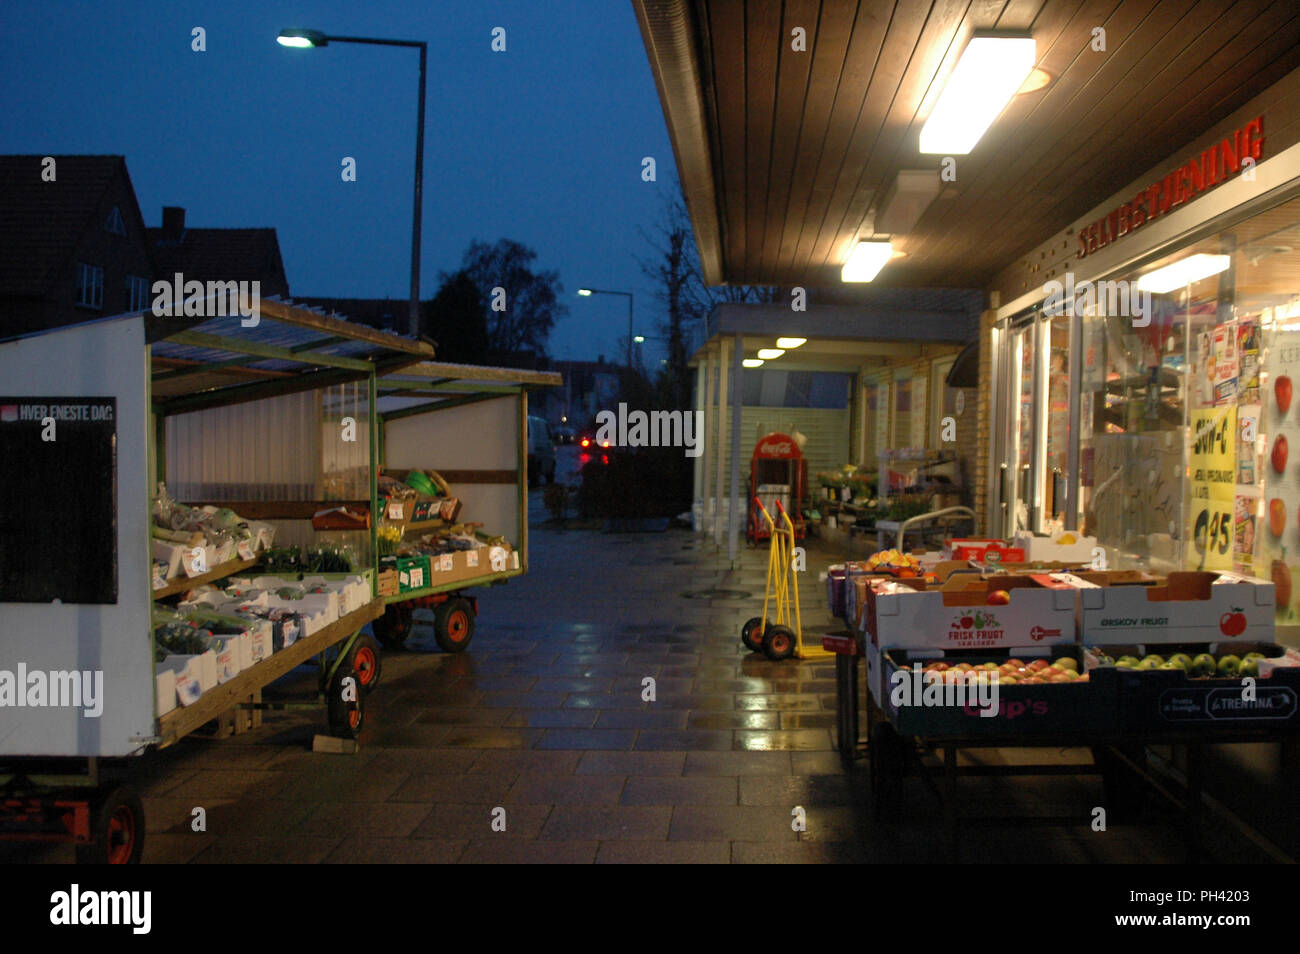 Sonderborg, Denmark - January 31, 2008: Small local market at evening, few minutes before closing time, the final closing for this littlle market. Stock Photo